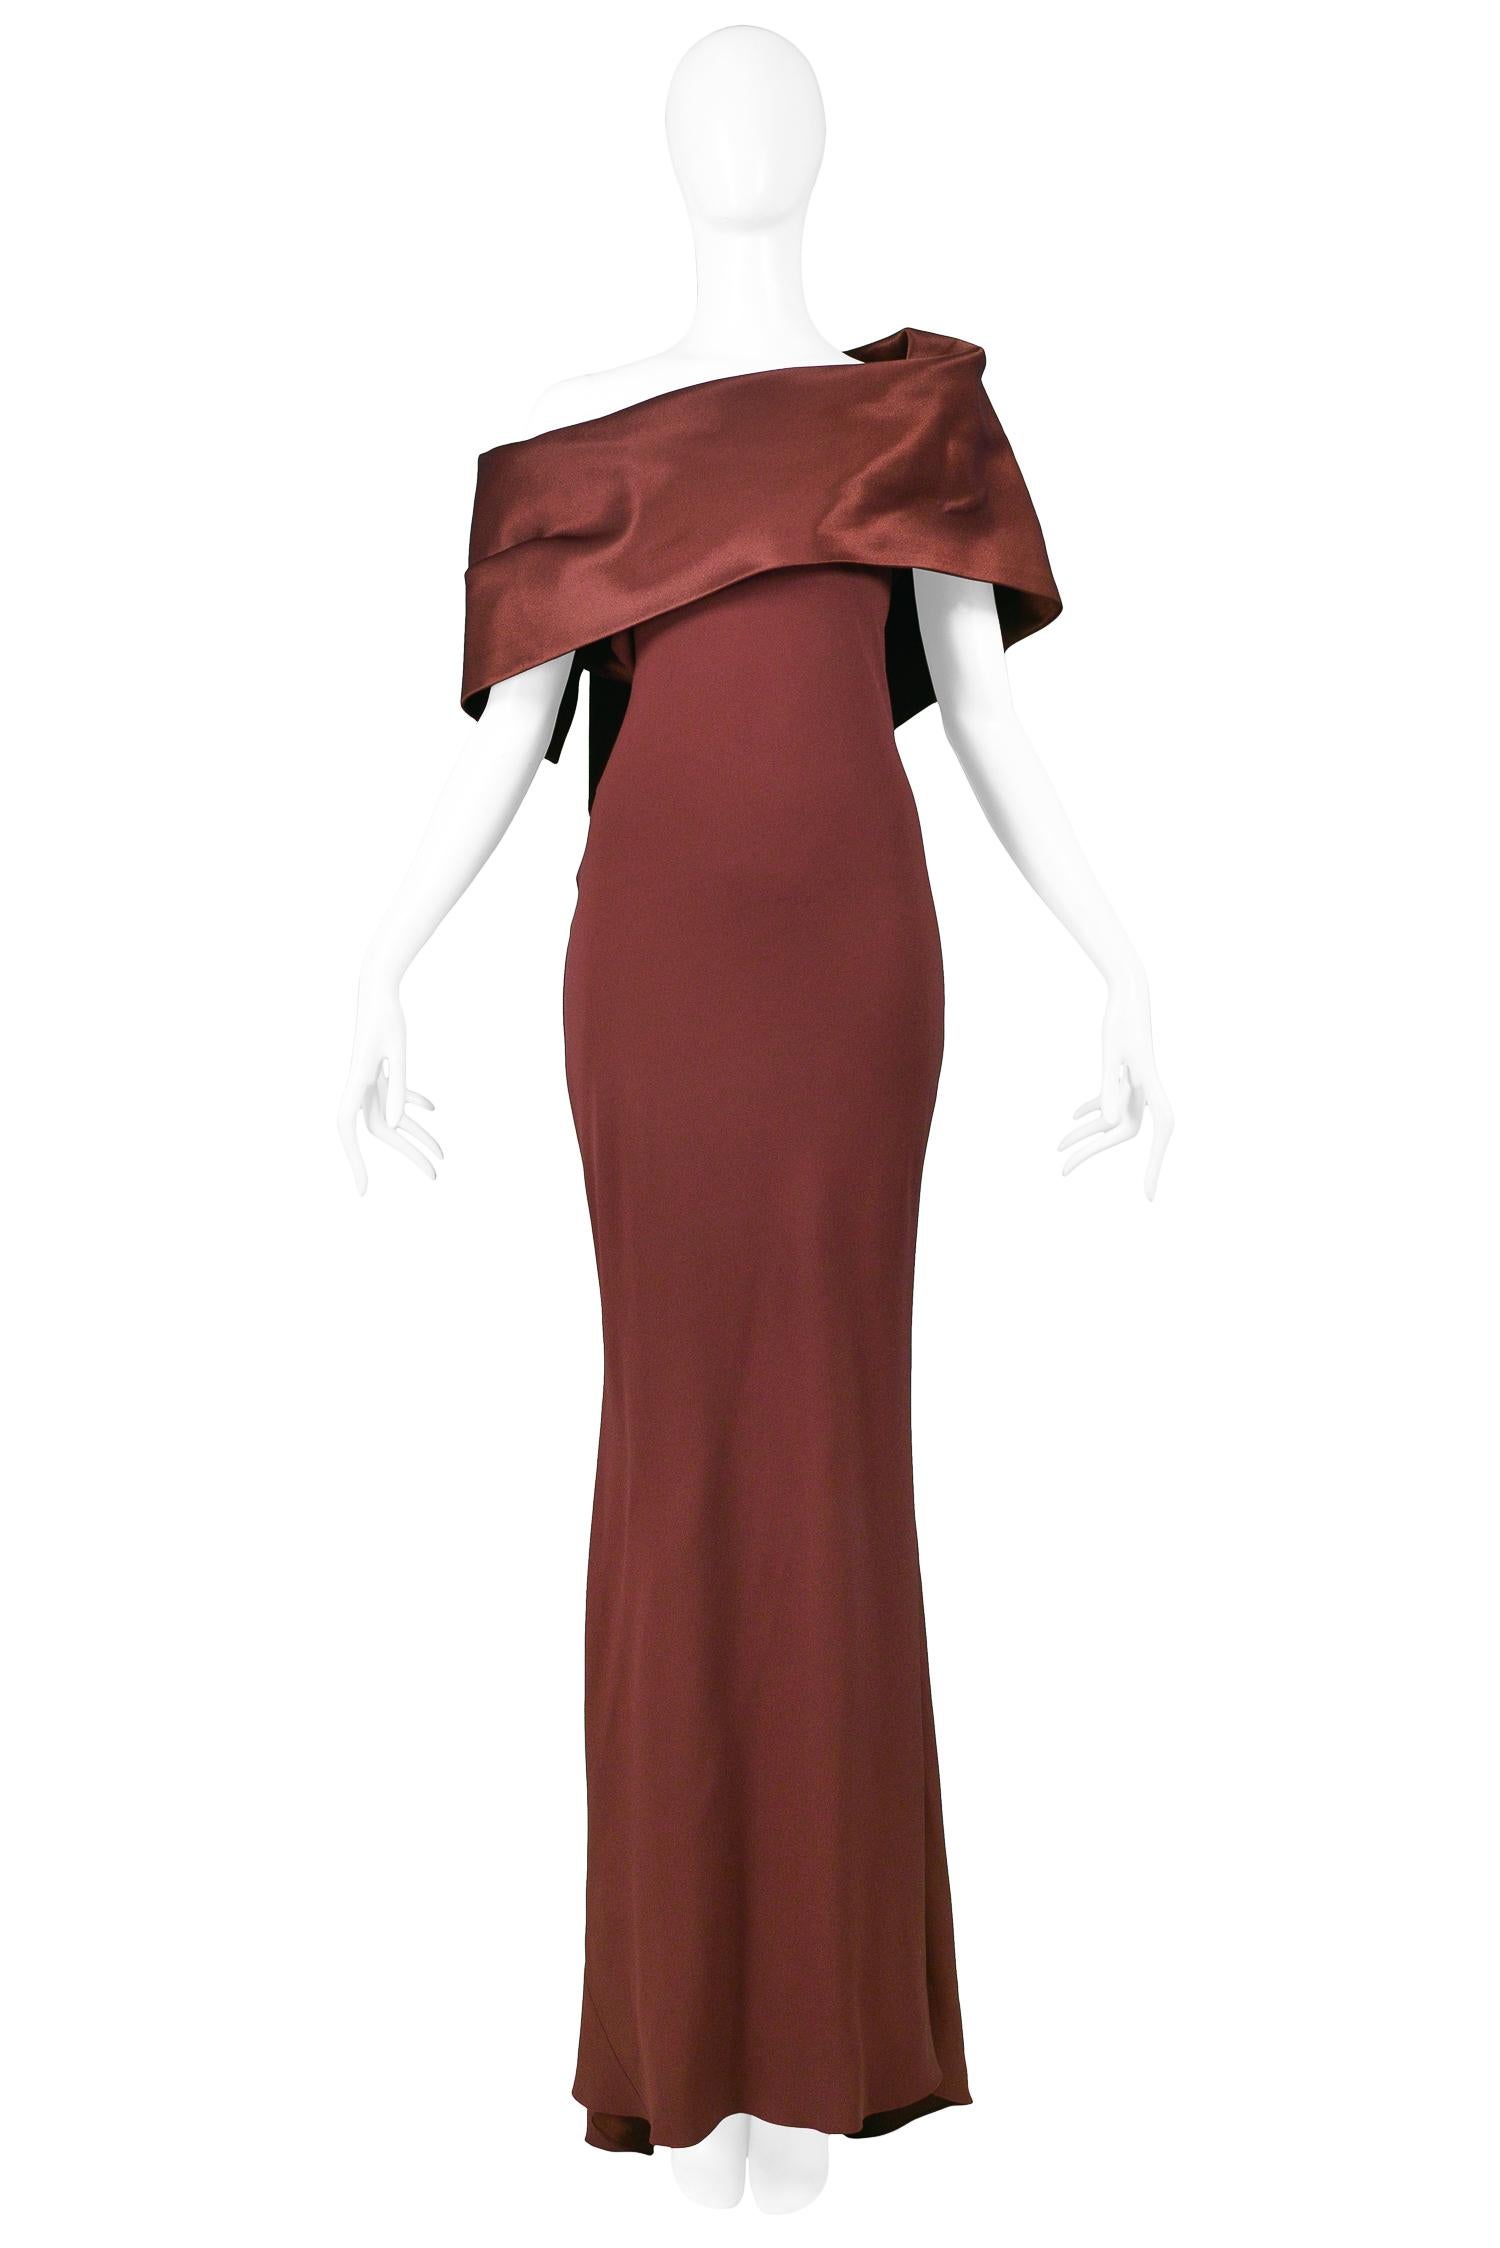 Vintage John Galliano aubergine satin bias-cut asymmetrical cold shoulder gown with attached bodice overlay and bias hem. 

Excellent Vintage Condition.

Size: 44